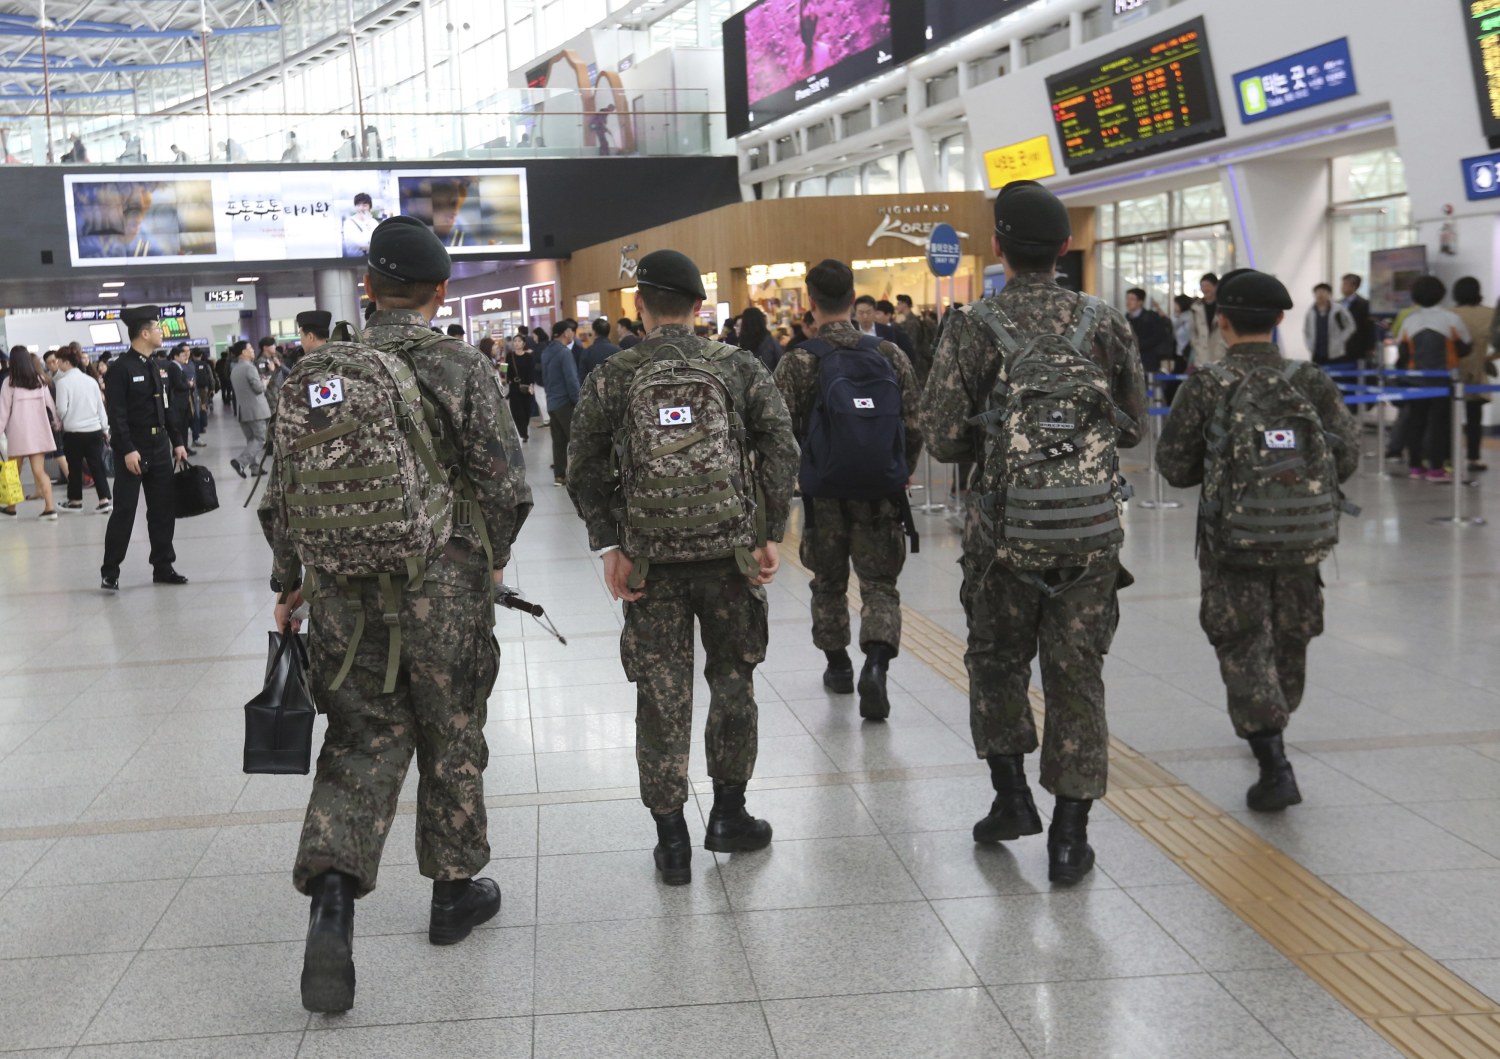 After Sex Video, South Korea Accused of Targeting Gay Soldiers image